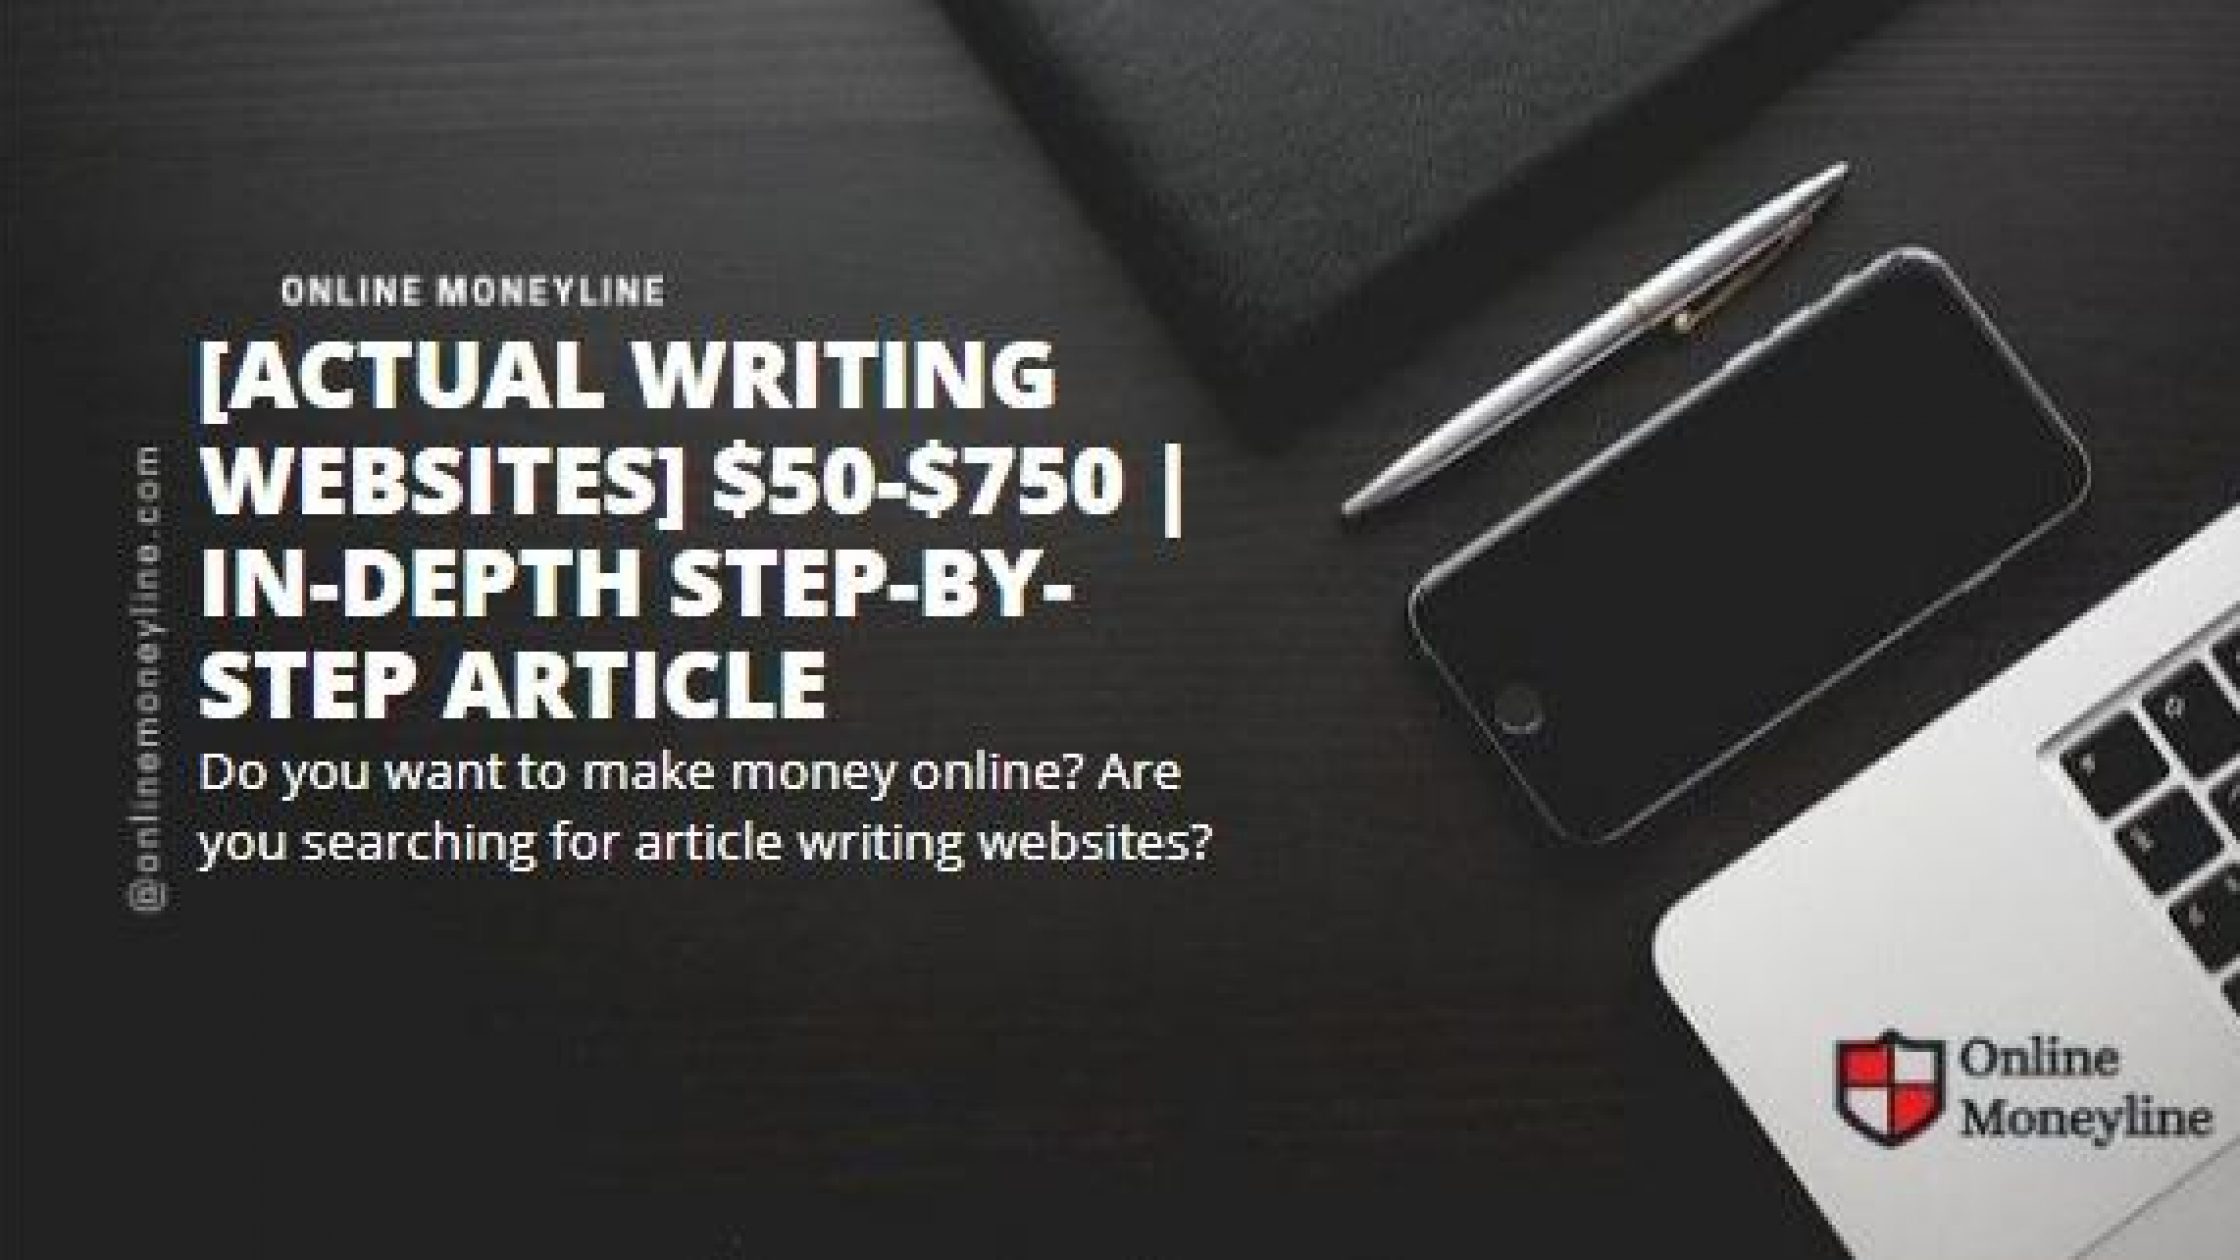 [Actual Writing Websites] $50-$750 | In-depth Step-by-Step Article